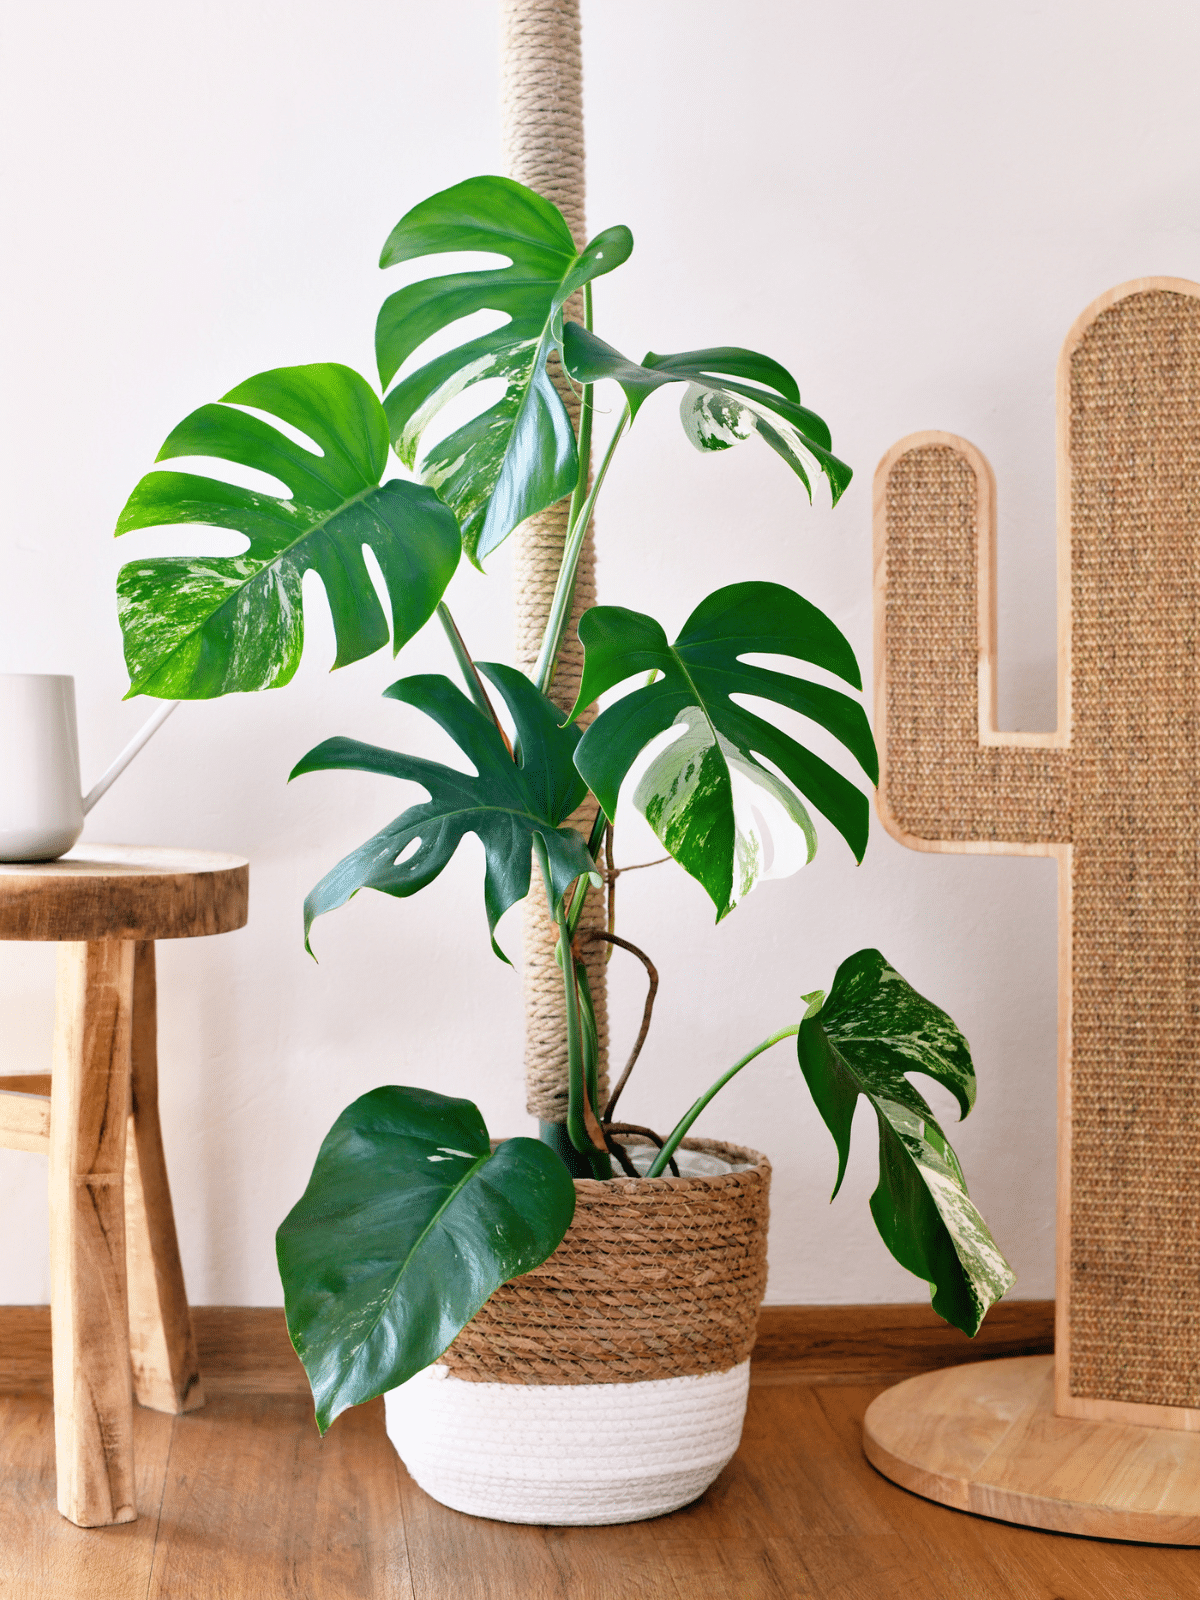 Monstera Variegata in an elegant pot, with wooden table on the side.